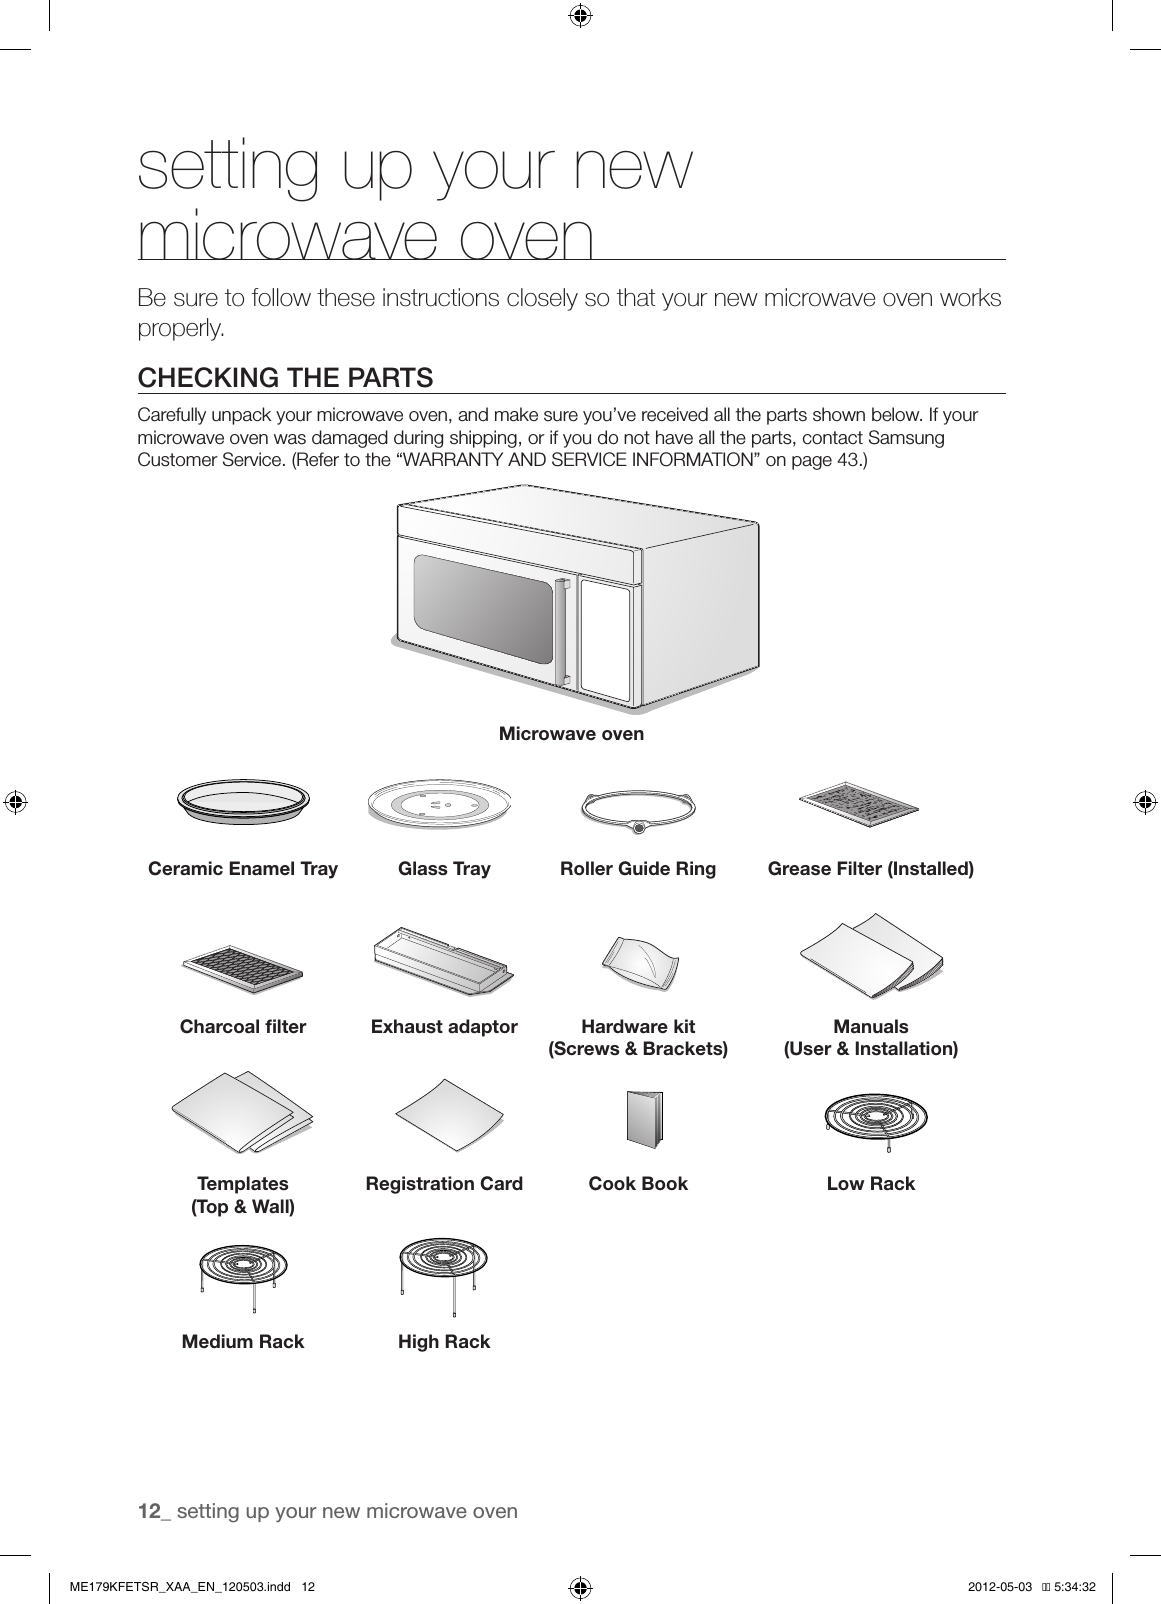 12_ setting up your new microwave oven setting up your new microwave ovenBe sure to follow these instructions closely so that your new microwave oven works properly.CHECKING THE PARTSCarefully unpack your microwave oven, and make sure you’ve received all the parts shown below. If your microwave oven was damaged during shipping, or if you do not have all the parts, contact Samsung Customer Service. (Refer to the “WARRANTY AND SERVICE INFORMATION” on page 43.)Microwave ovenCeramic Enamel Tray Glass Tray Roller Guide Ring Grease Filter (Installed)Charcoal ﬁlter Exhaust adaptor Hardware kit (Screws &amp; Brackets)Manuals(User &amp; Installation)Templates(Top &amp; Wall)Registration Card Cook Book Low RackMedium Rack High RackME179KFETSR_XAA_EN_120503.indd   12 2012-05-03   �� 5:34:32